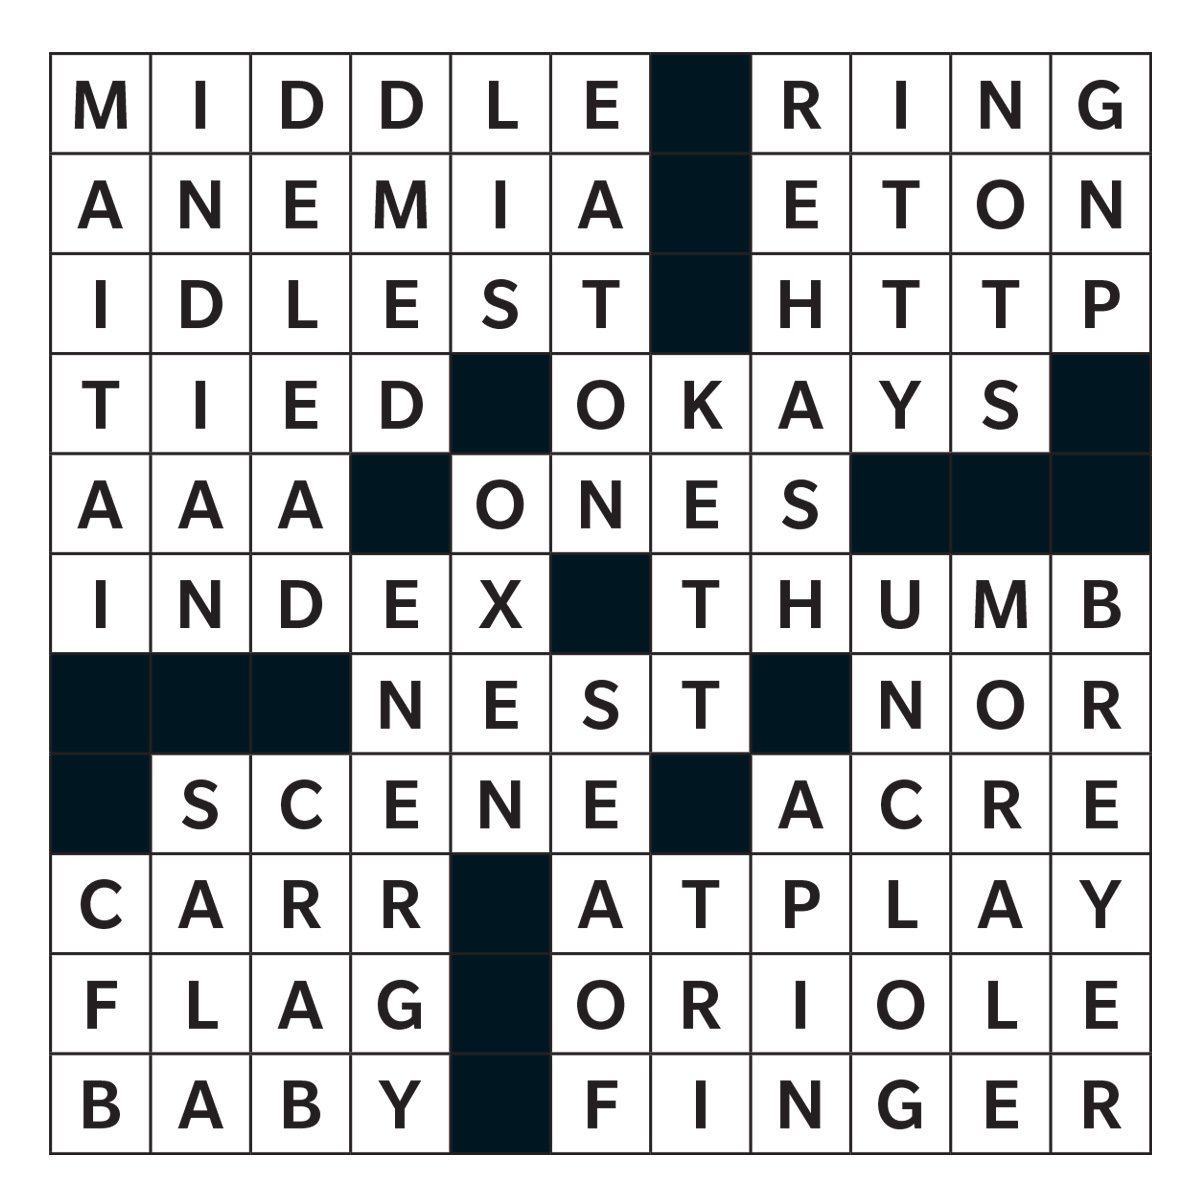 Printable Crossword Puzzle Answers - June 2022